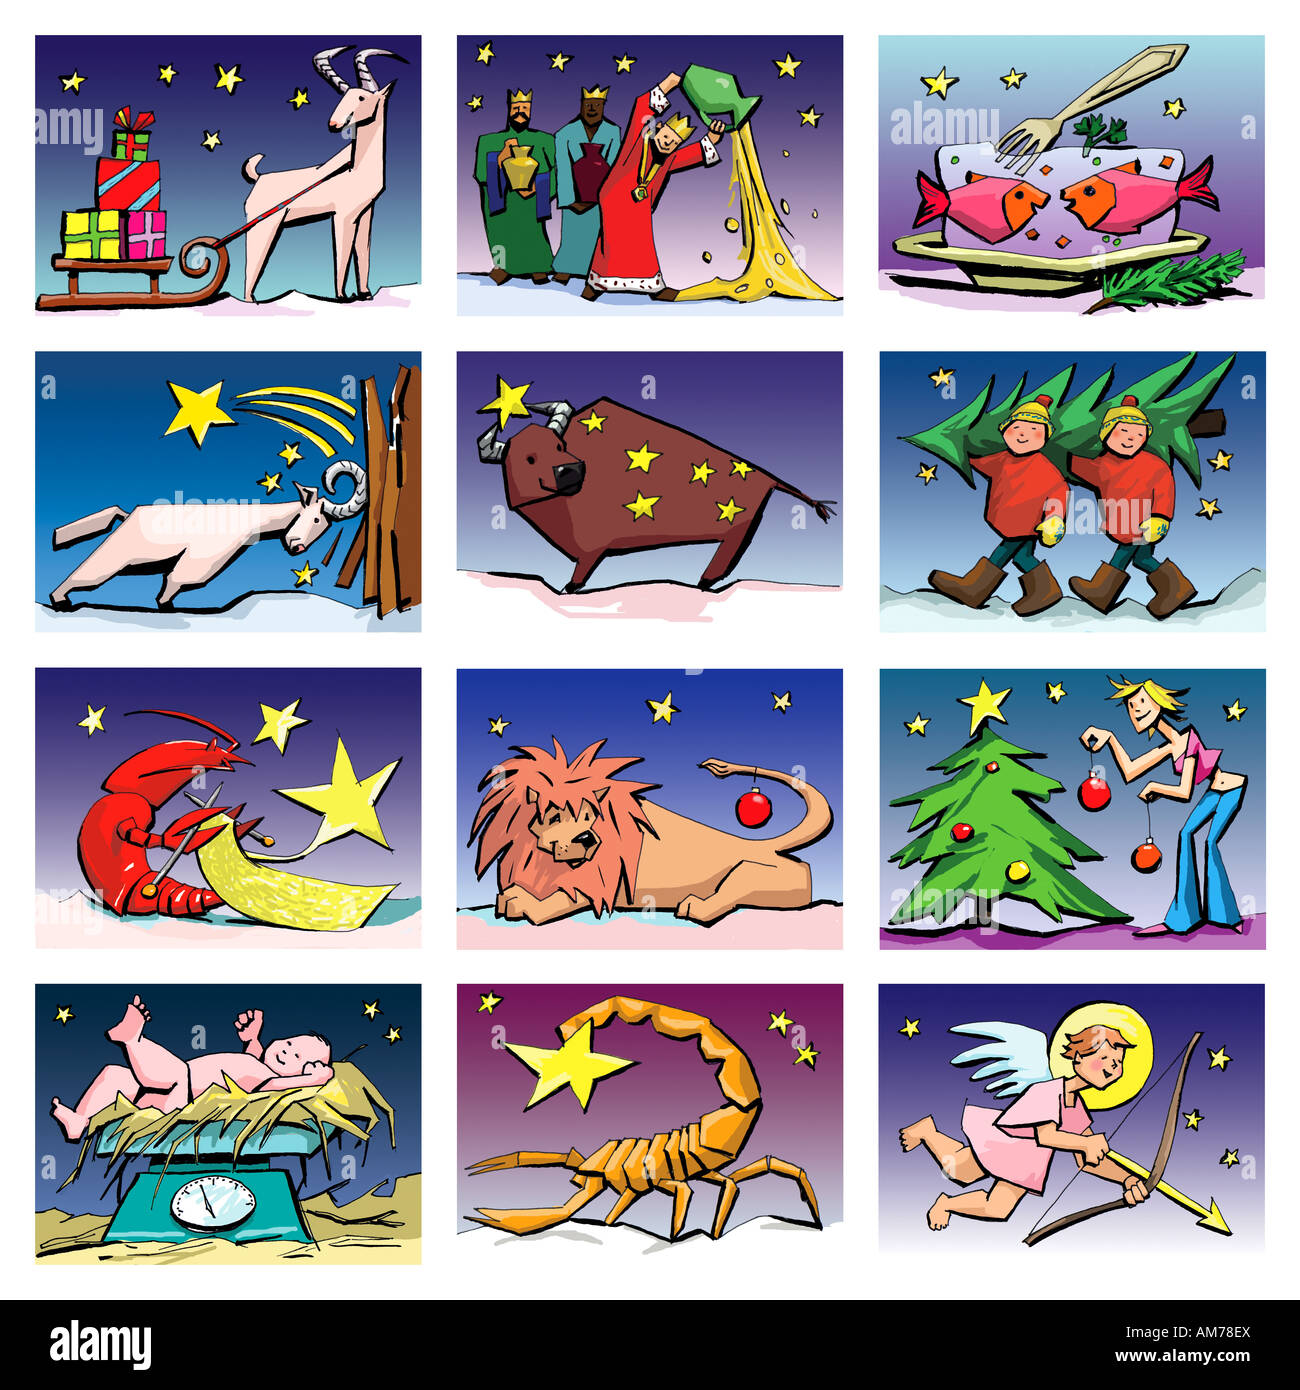 Sequence of illustrations showing Christmas horoscope - 12 zodiac signs inspired by Christmas Stock Photo